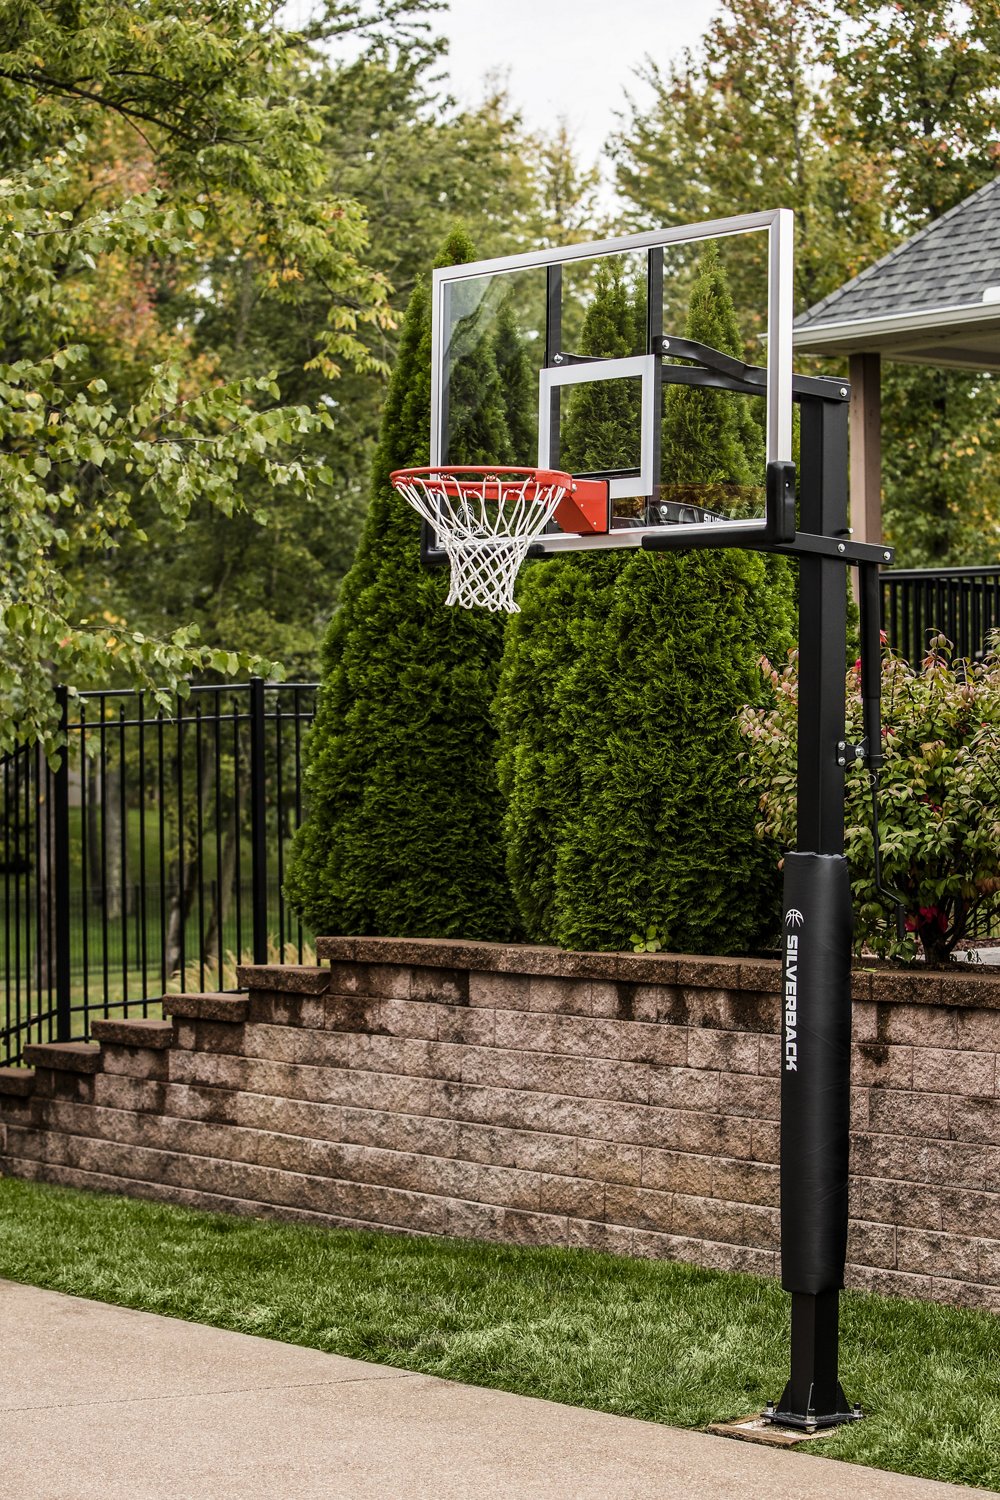 Silverback 60 in Inground Tempered-Glass Basketball Hoop                                                                         - view number 2